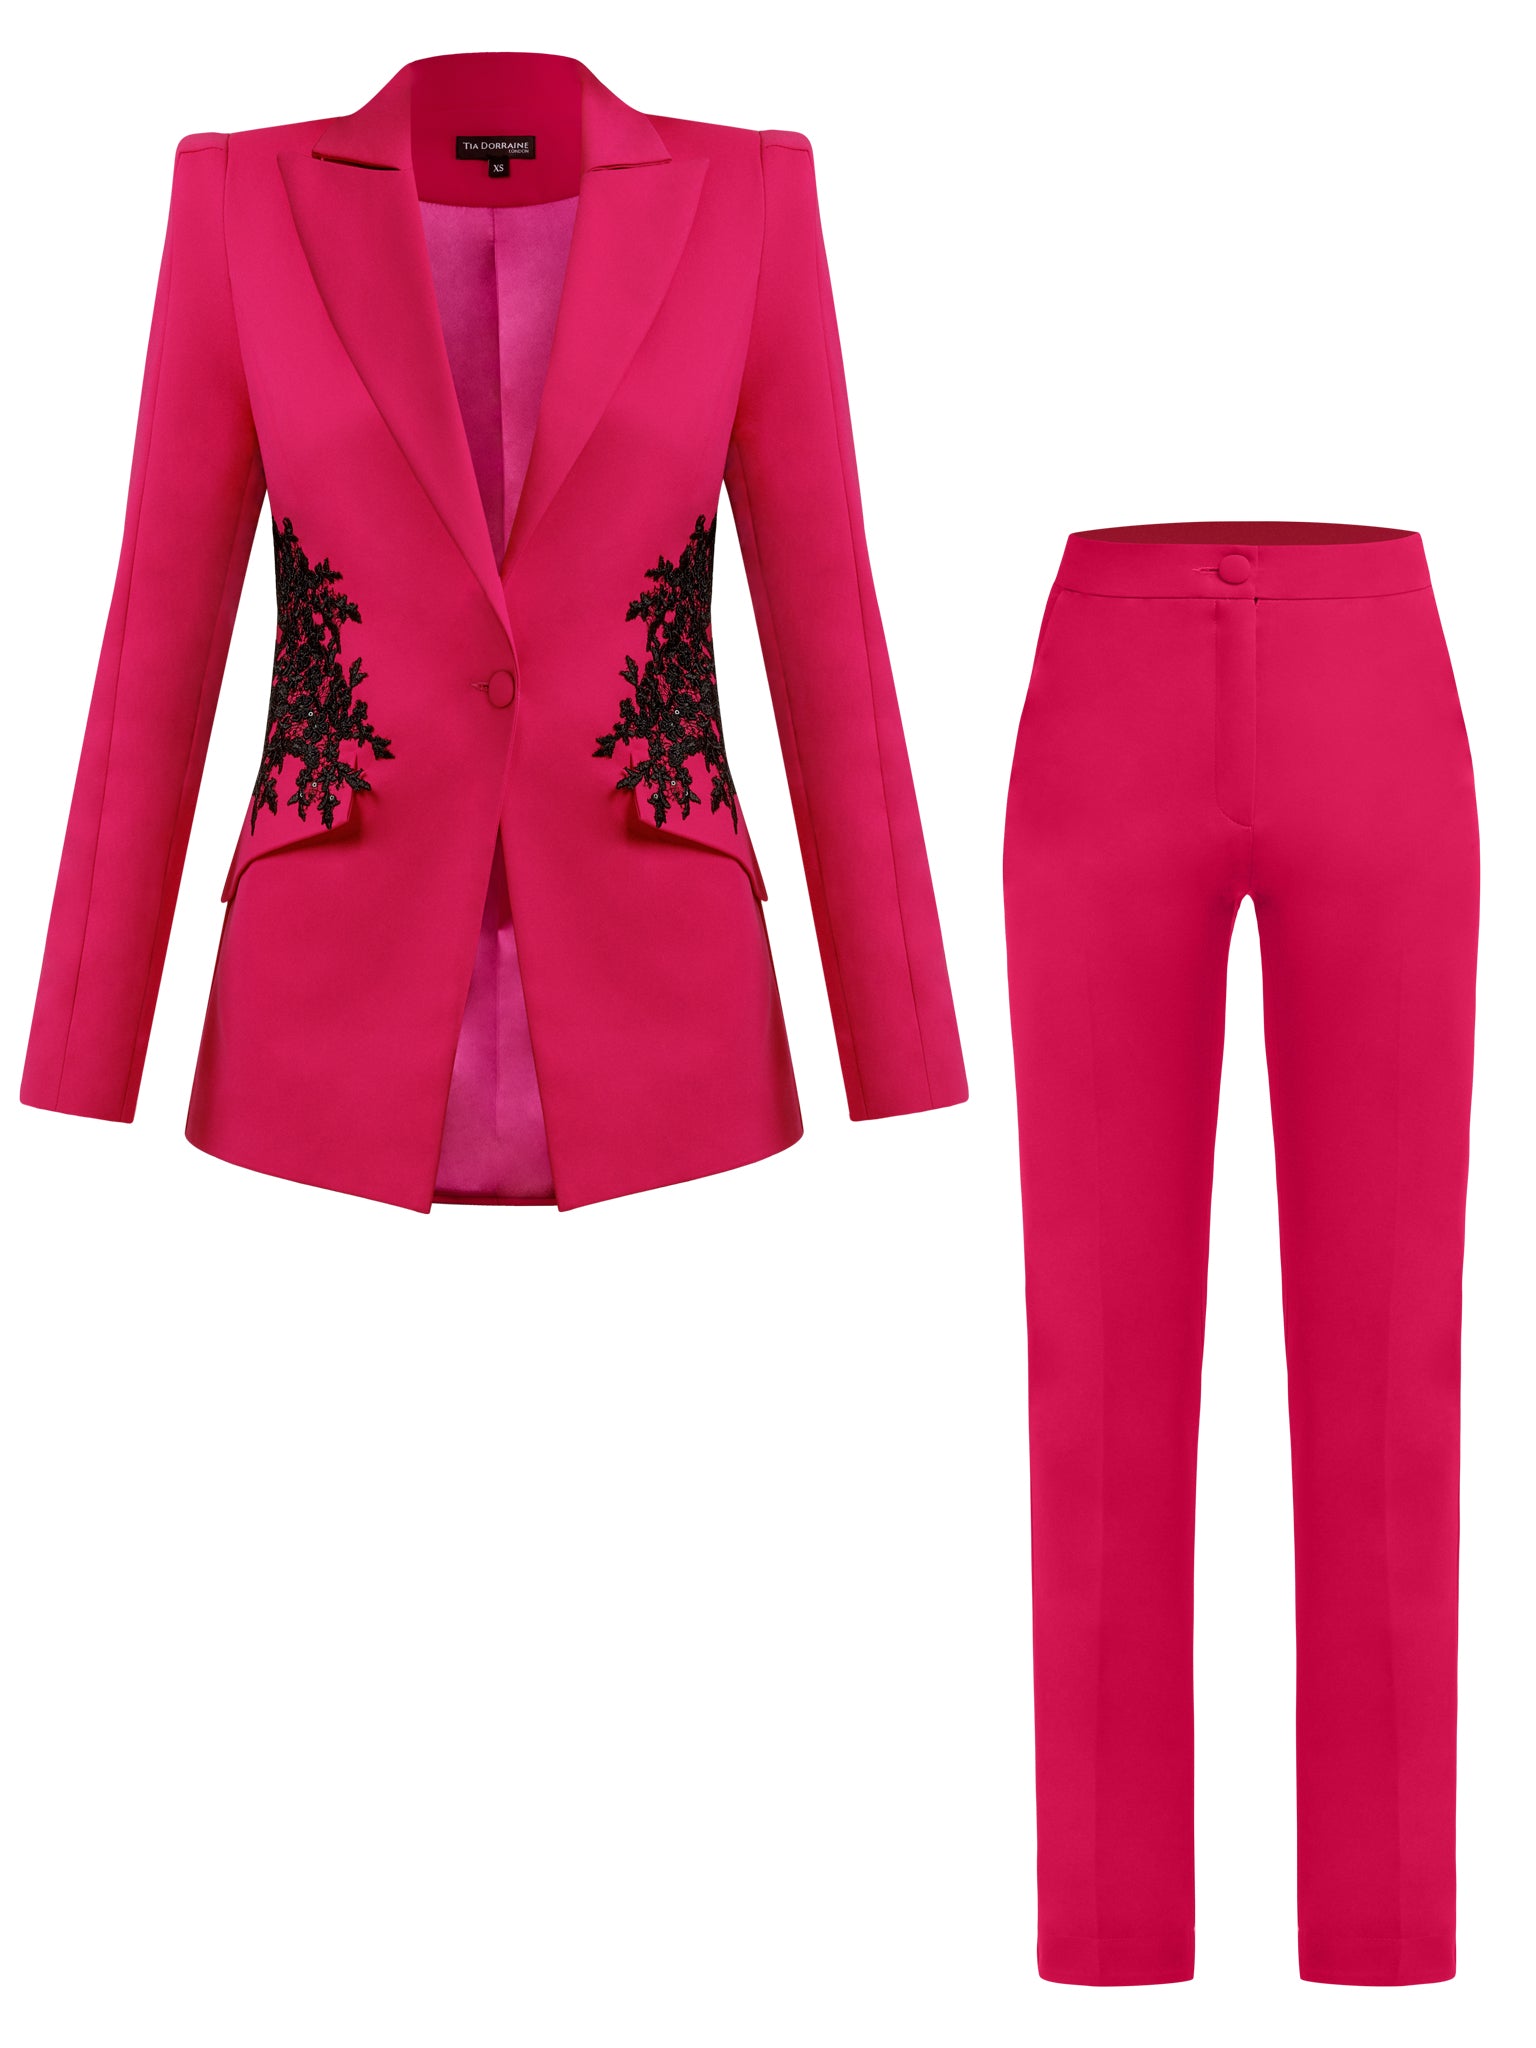 Fantasy Tailored Suit with Embroidery - Pink by Tia Dorraine Women's Luxury Fashion Designer Clothing Brand